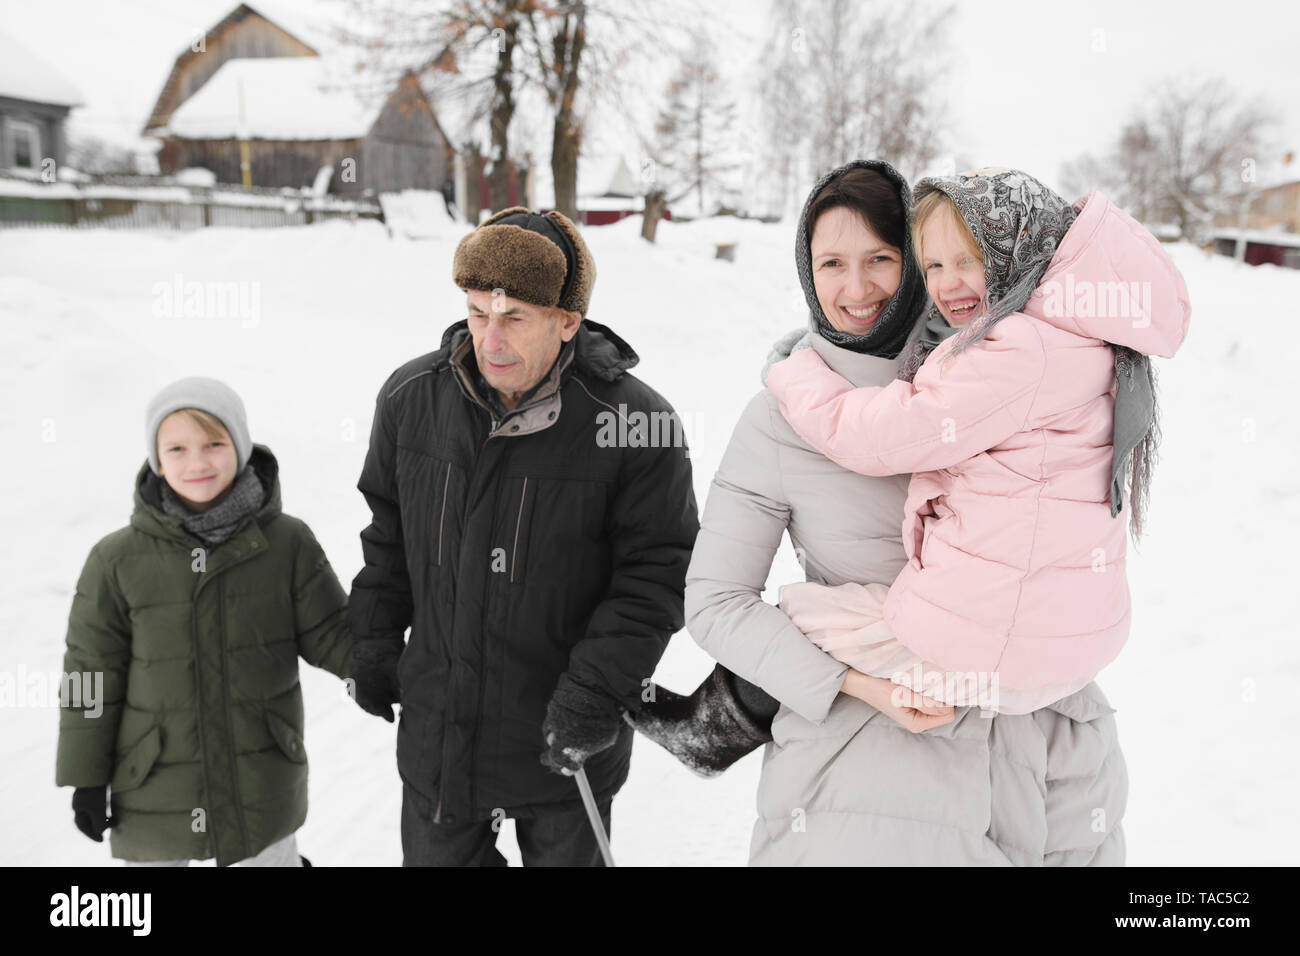 Grandfather strolling together with daughter and grandchildren in winter Stock Photo